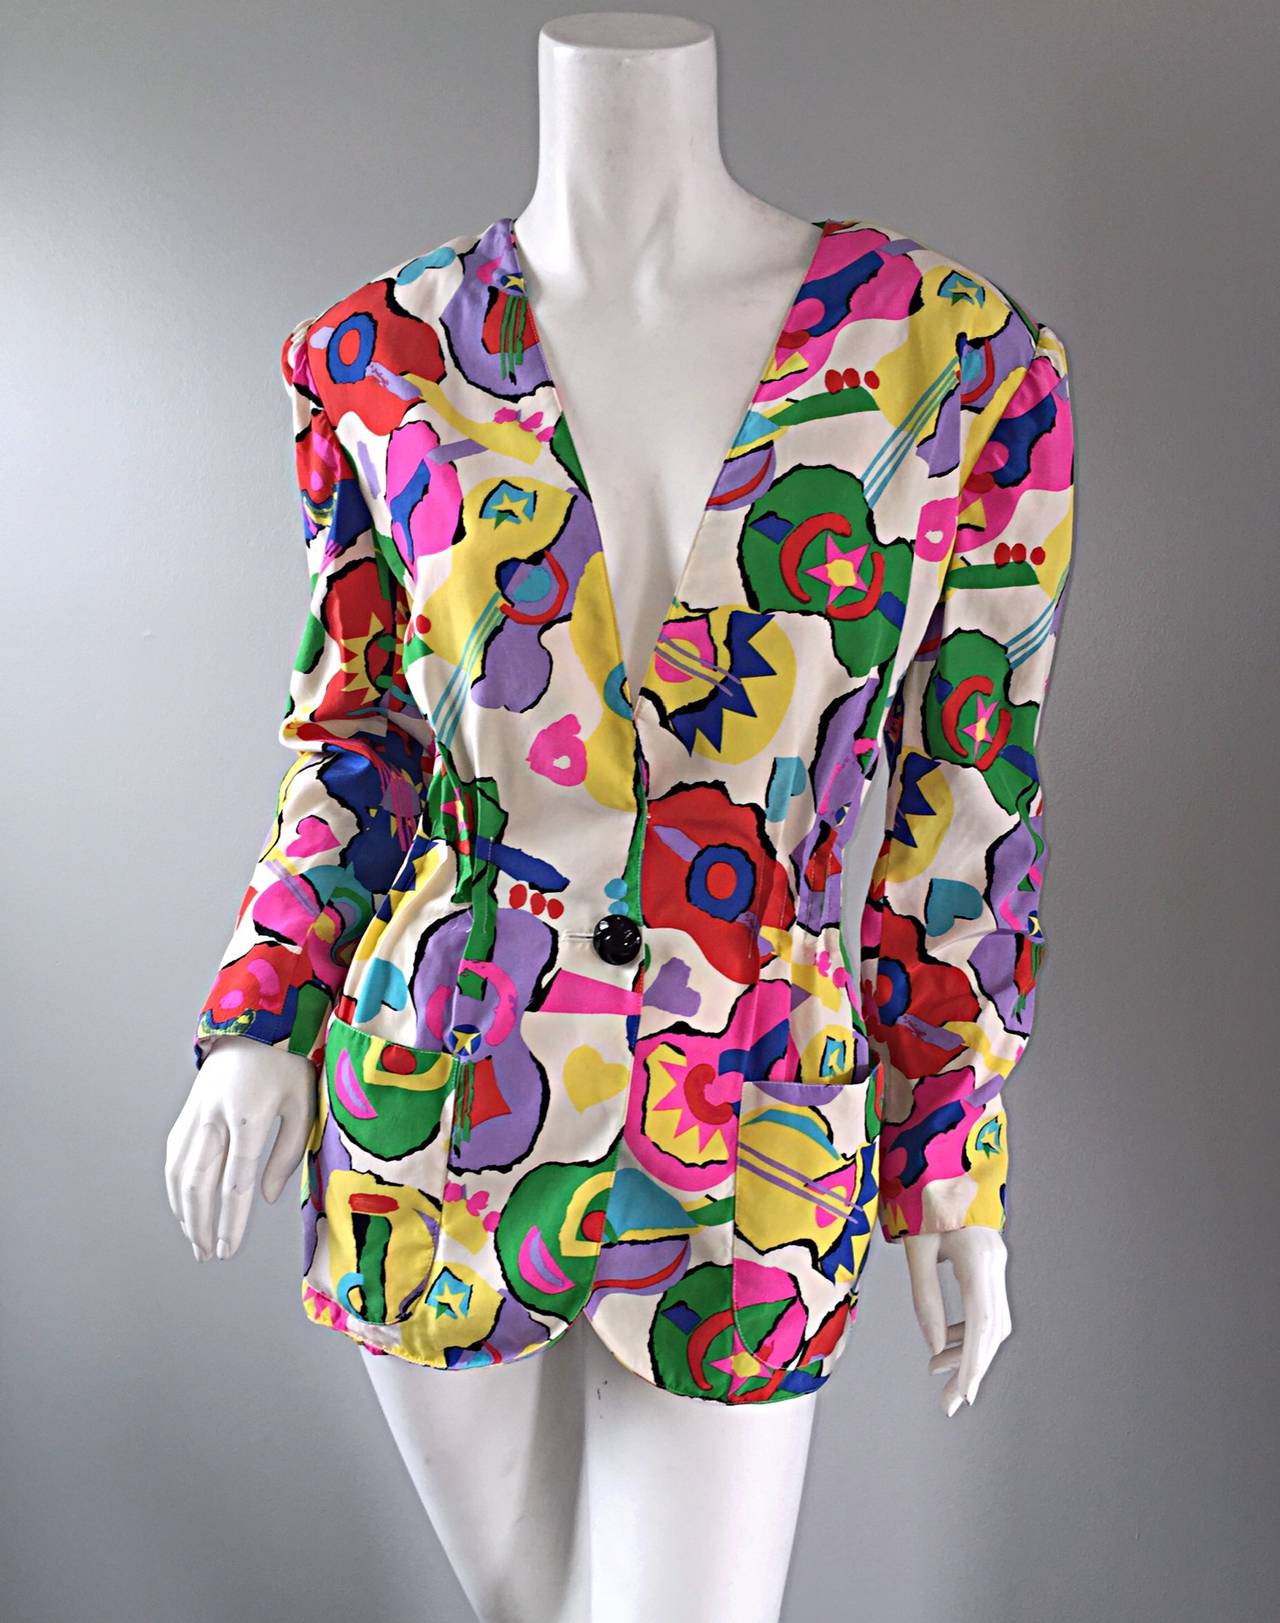 Incredible vintage Emanuel Ungaro silk blazer/jacket! Novelty guitar and heart prints throughout! Vibrant colors, with an incredible fit.. Pleating details below bust make for a very flattering fit. Single black lacquered button at waist, with a